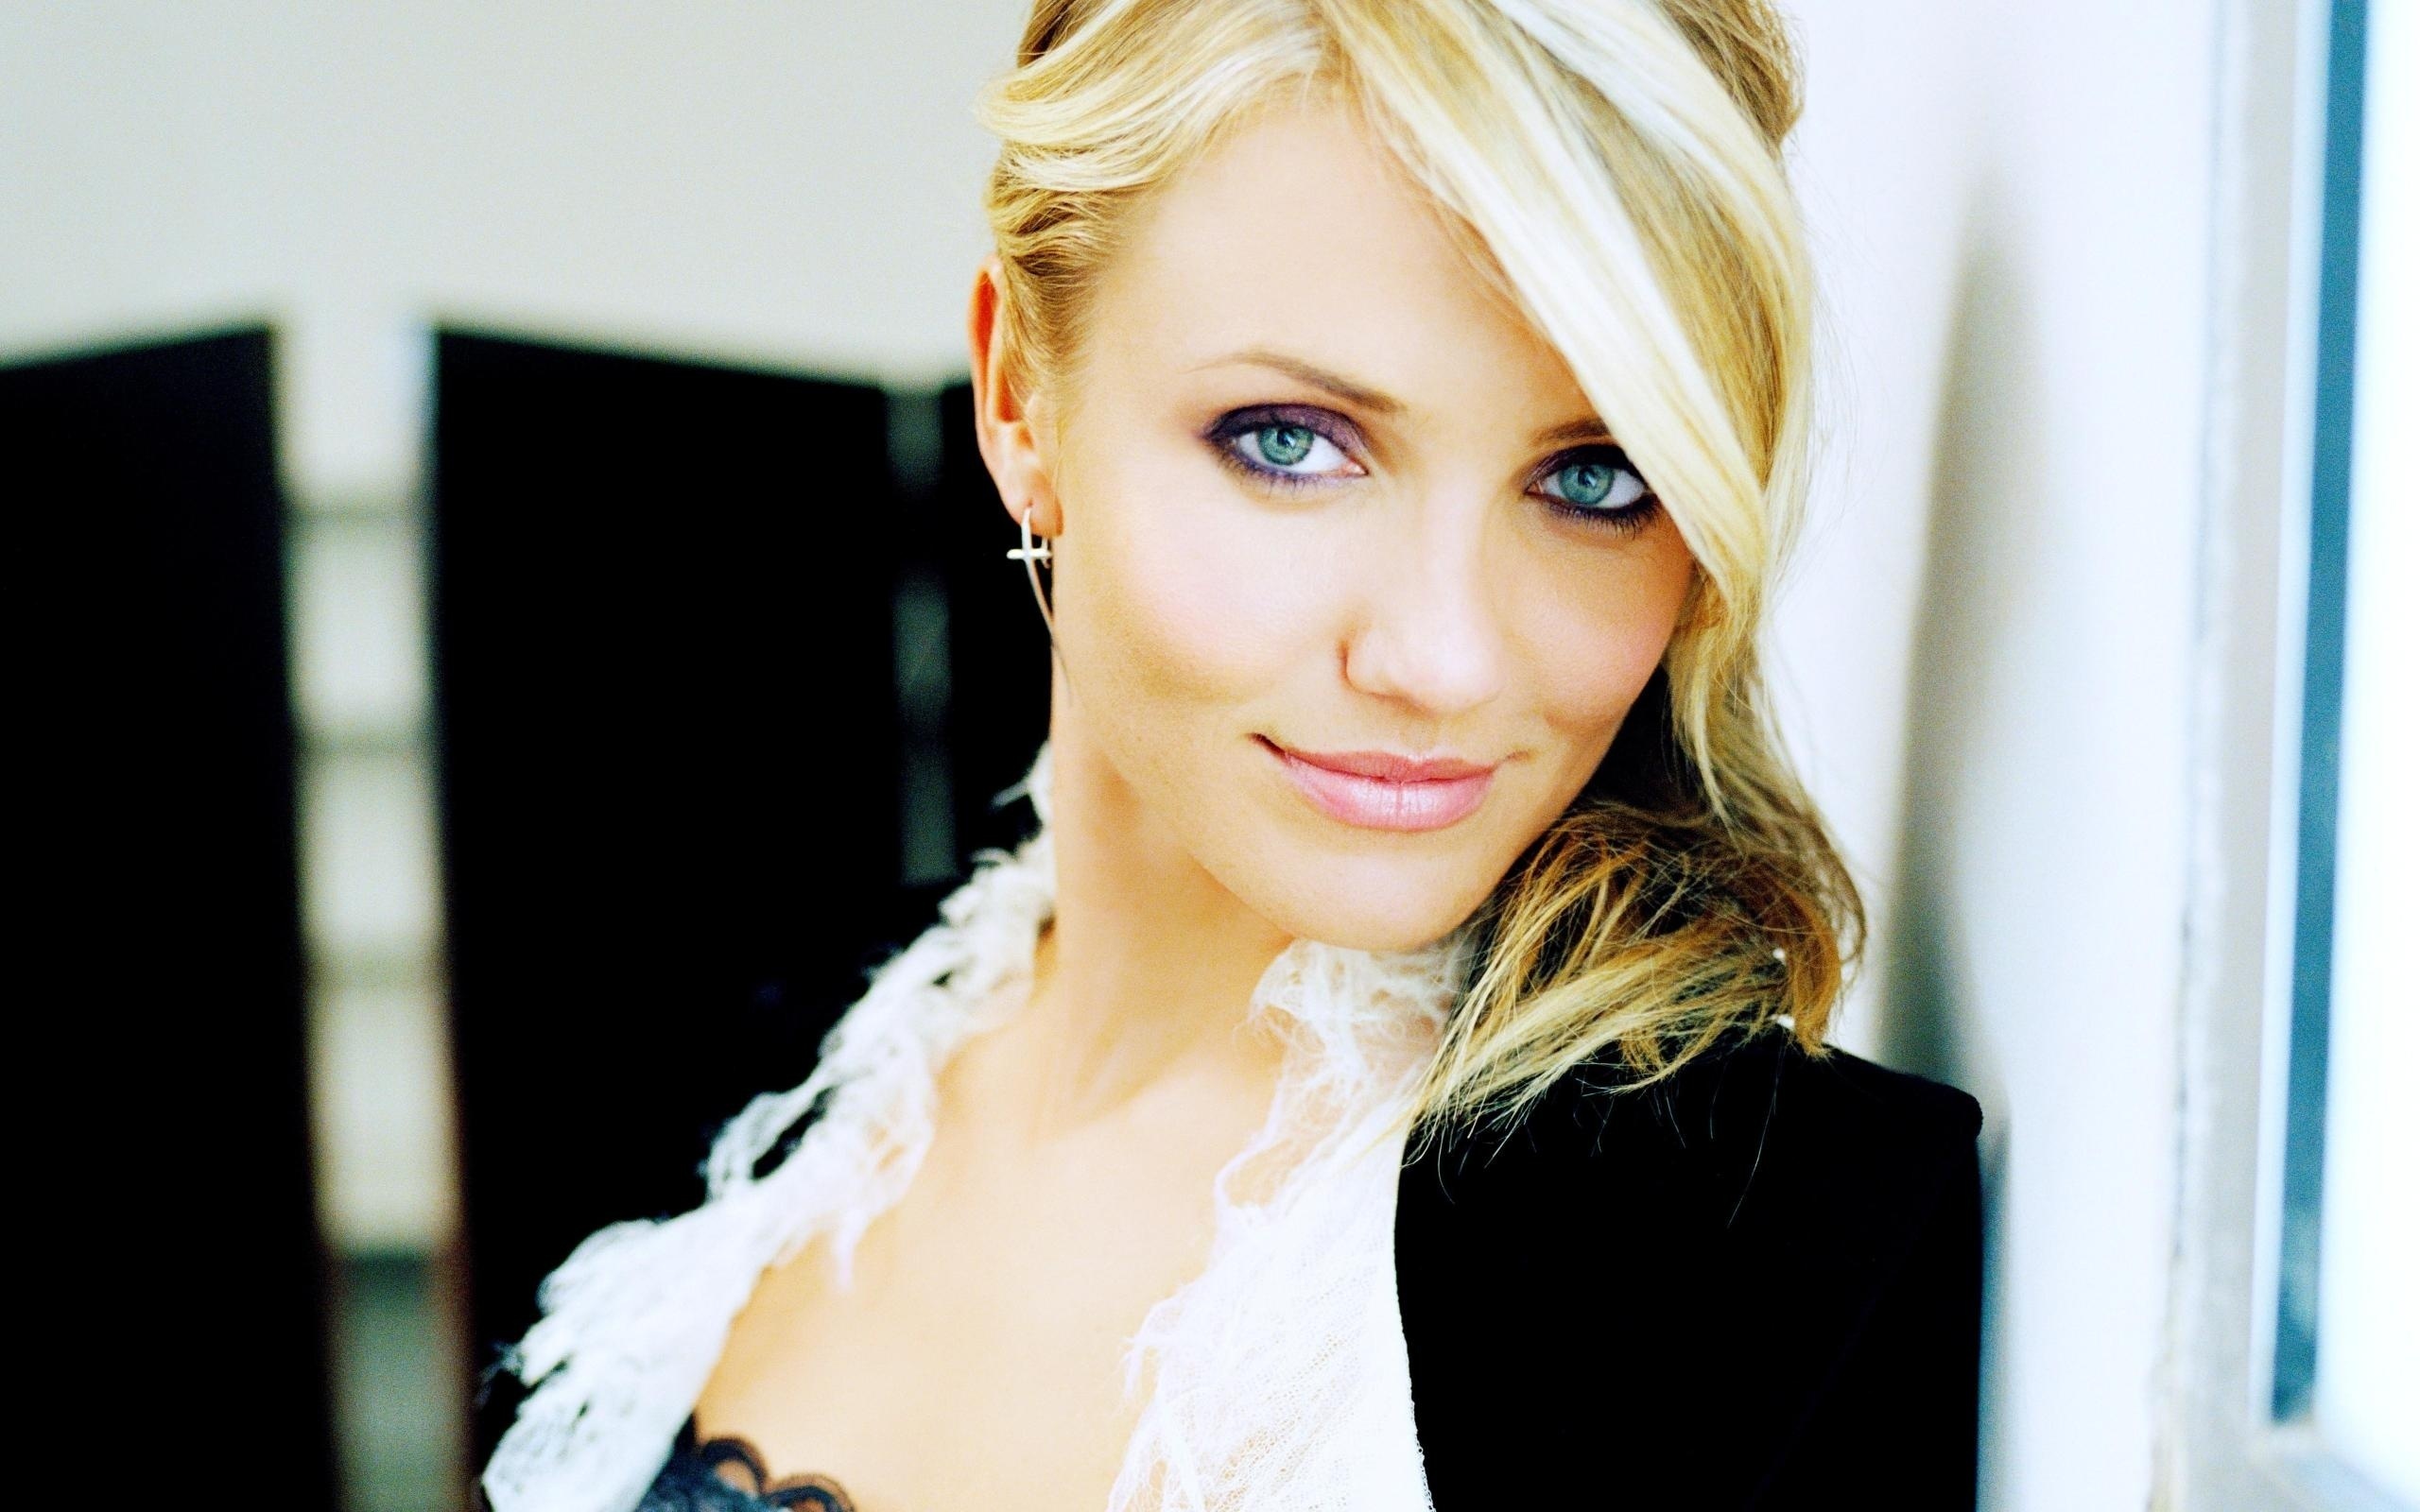 Cameron Diaz Fabulous Hd Wallpapers Wallpaper Hd Celebrities K Wallpapers Images And